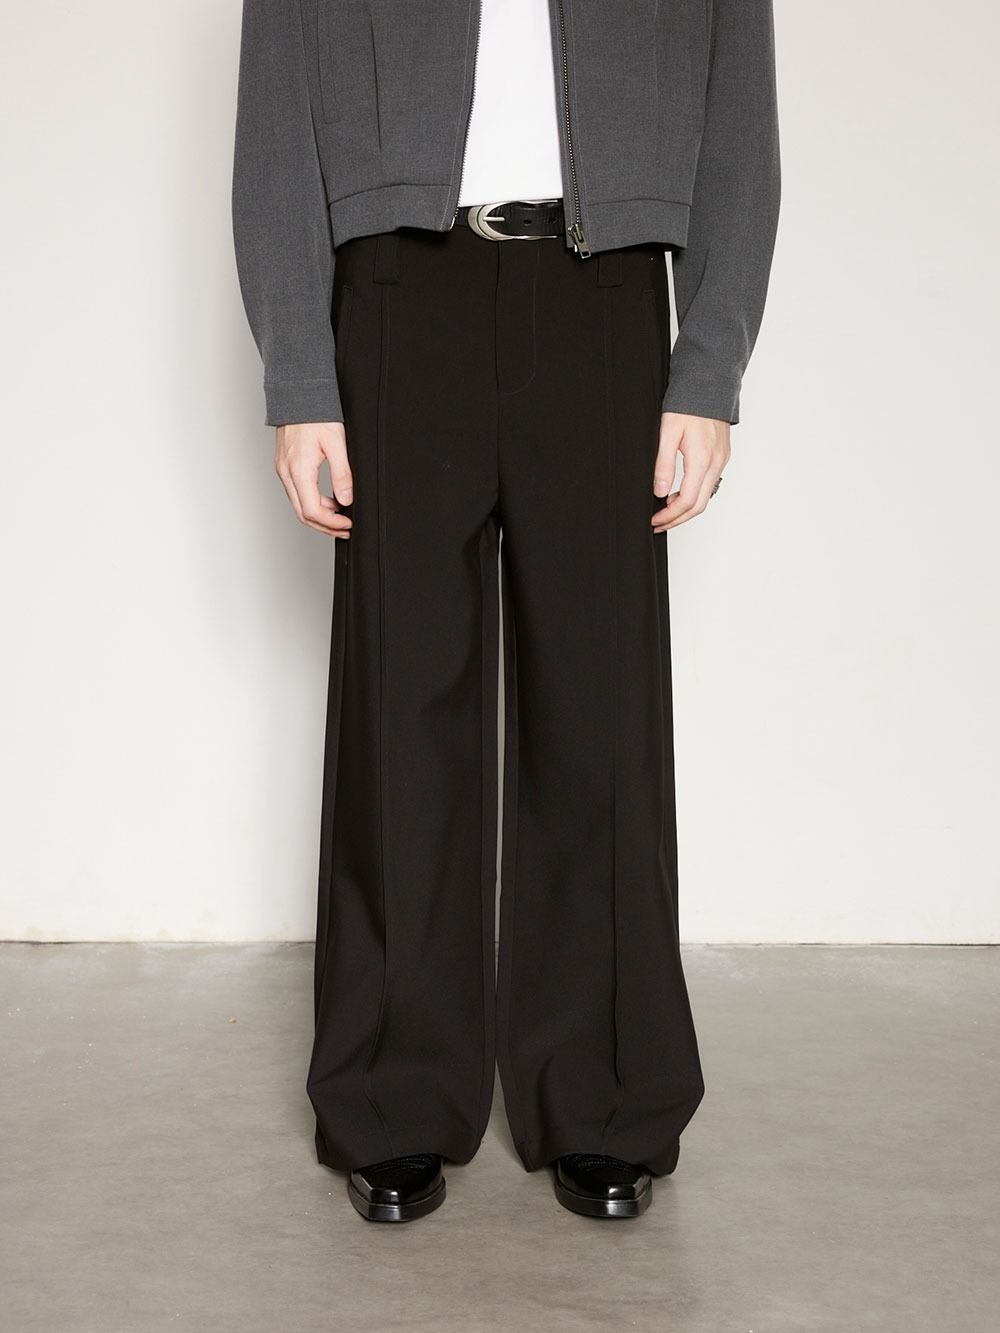 [AFterTaste] High-Waisted Tailored Wide-Leg Pants